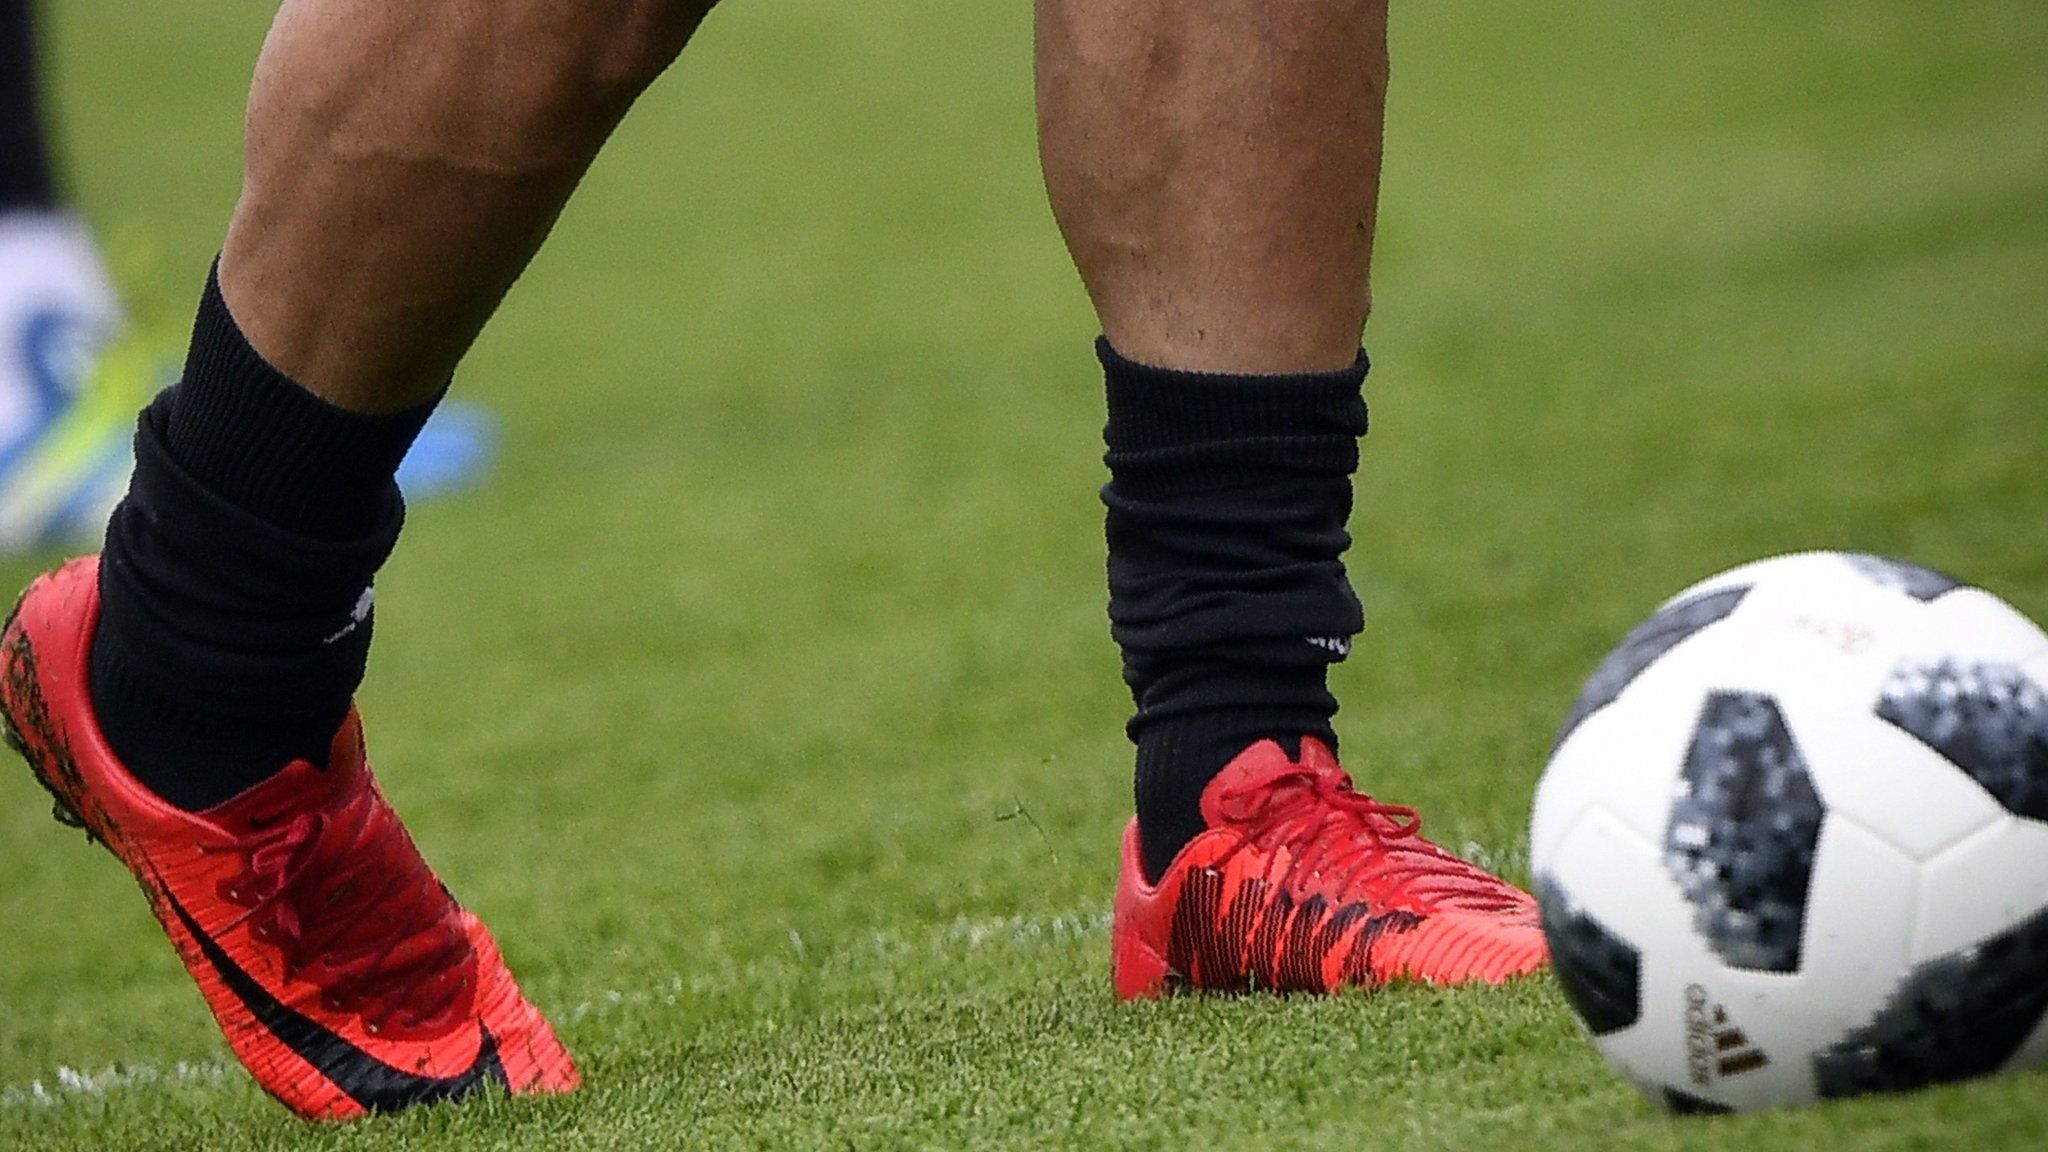 A picture taken on June 12, 2018 shows Nike football shoes of Iran's forward Mehdi Taremi during a training session in Bakovka, outside Moscow, ahead of the Russia 2018 World Cup football tournament.